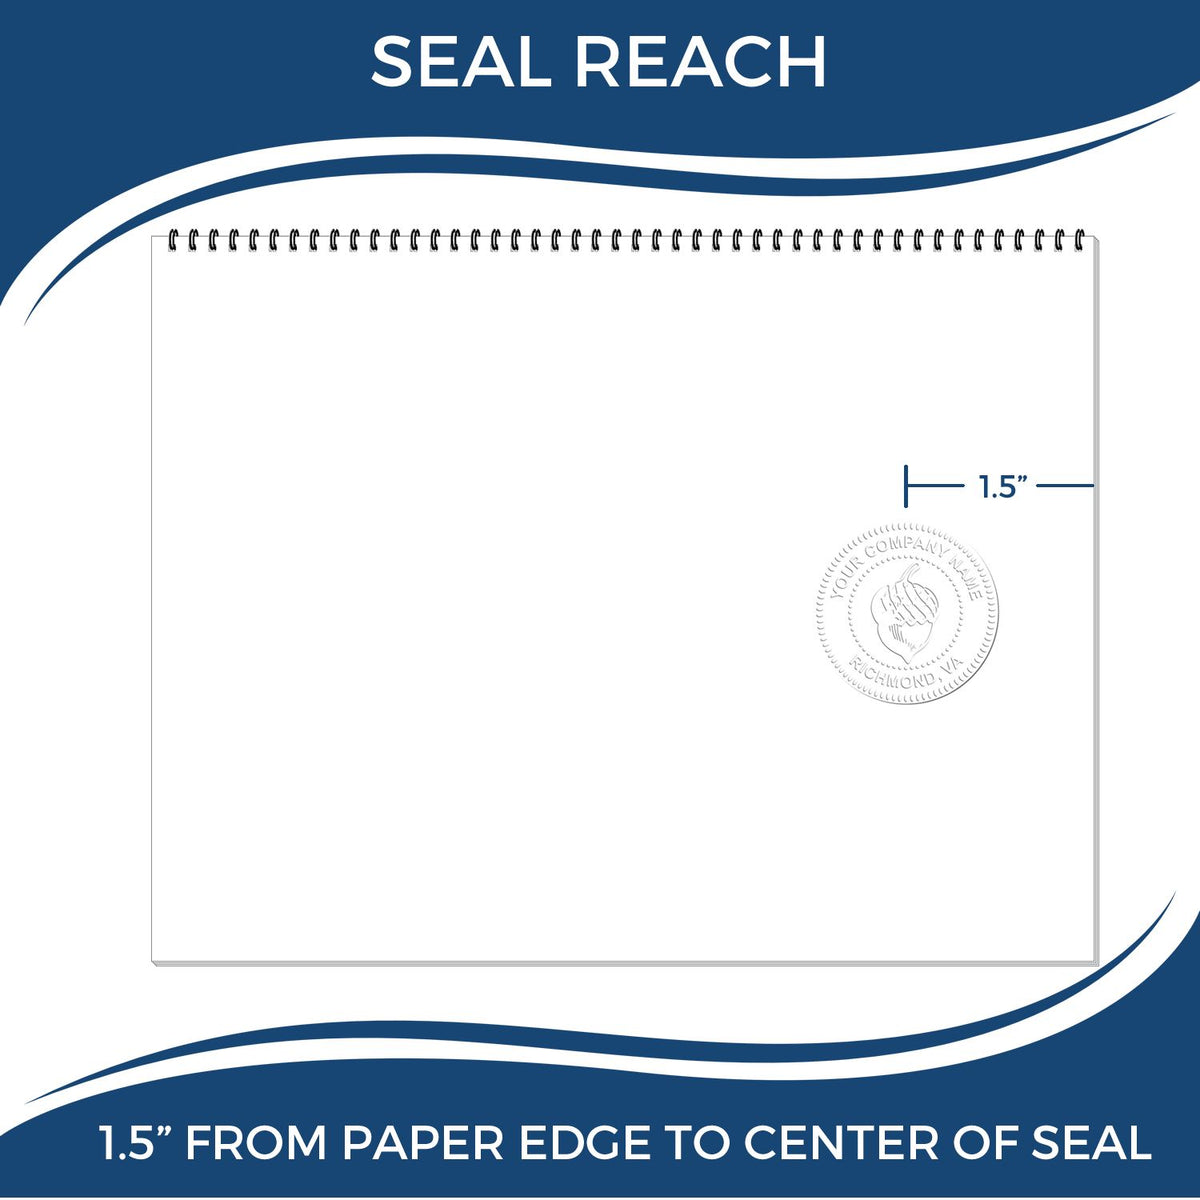 An infographic showing the seal reach which is represented by a ruler and a miniature seal image of the Arkansas Geologist Desk Seal